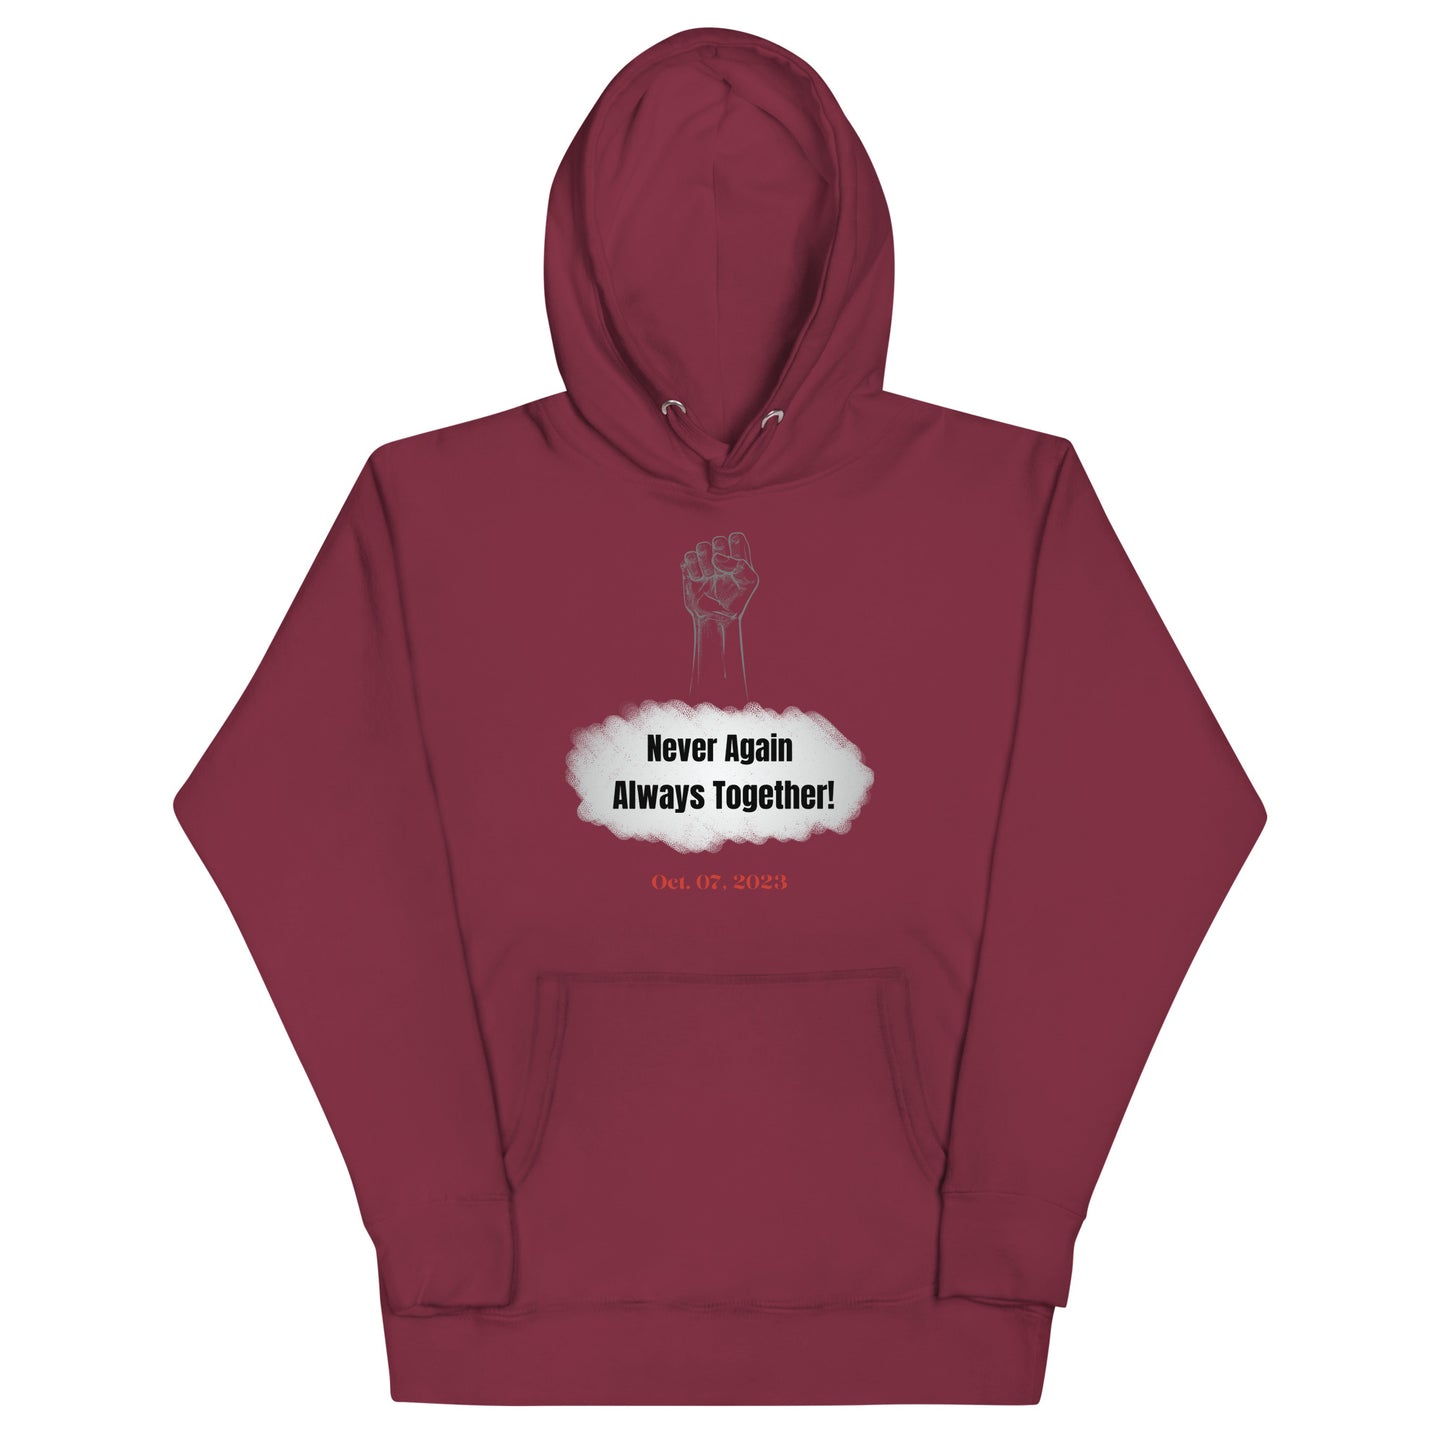 Never Again Always Together - Unisex Hoodie (6 colors)